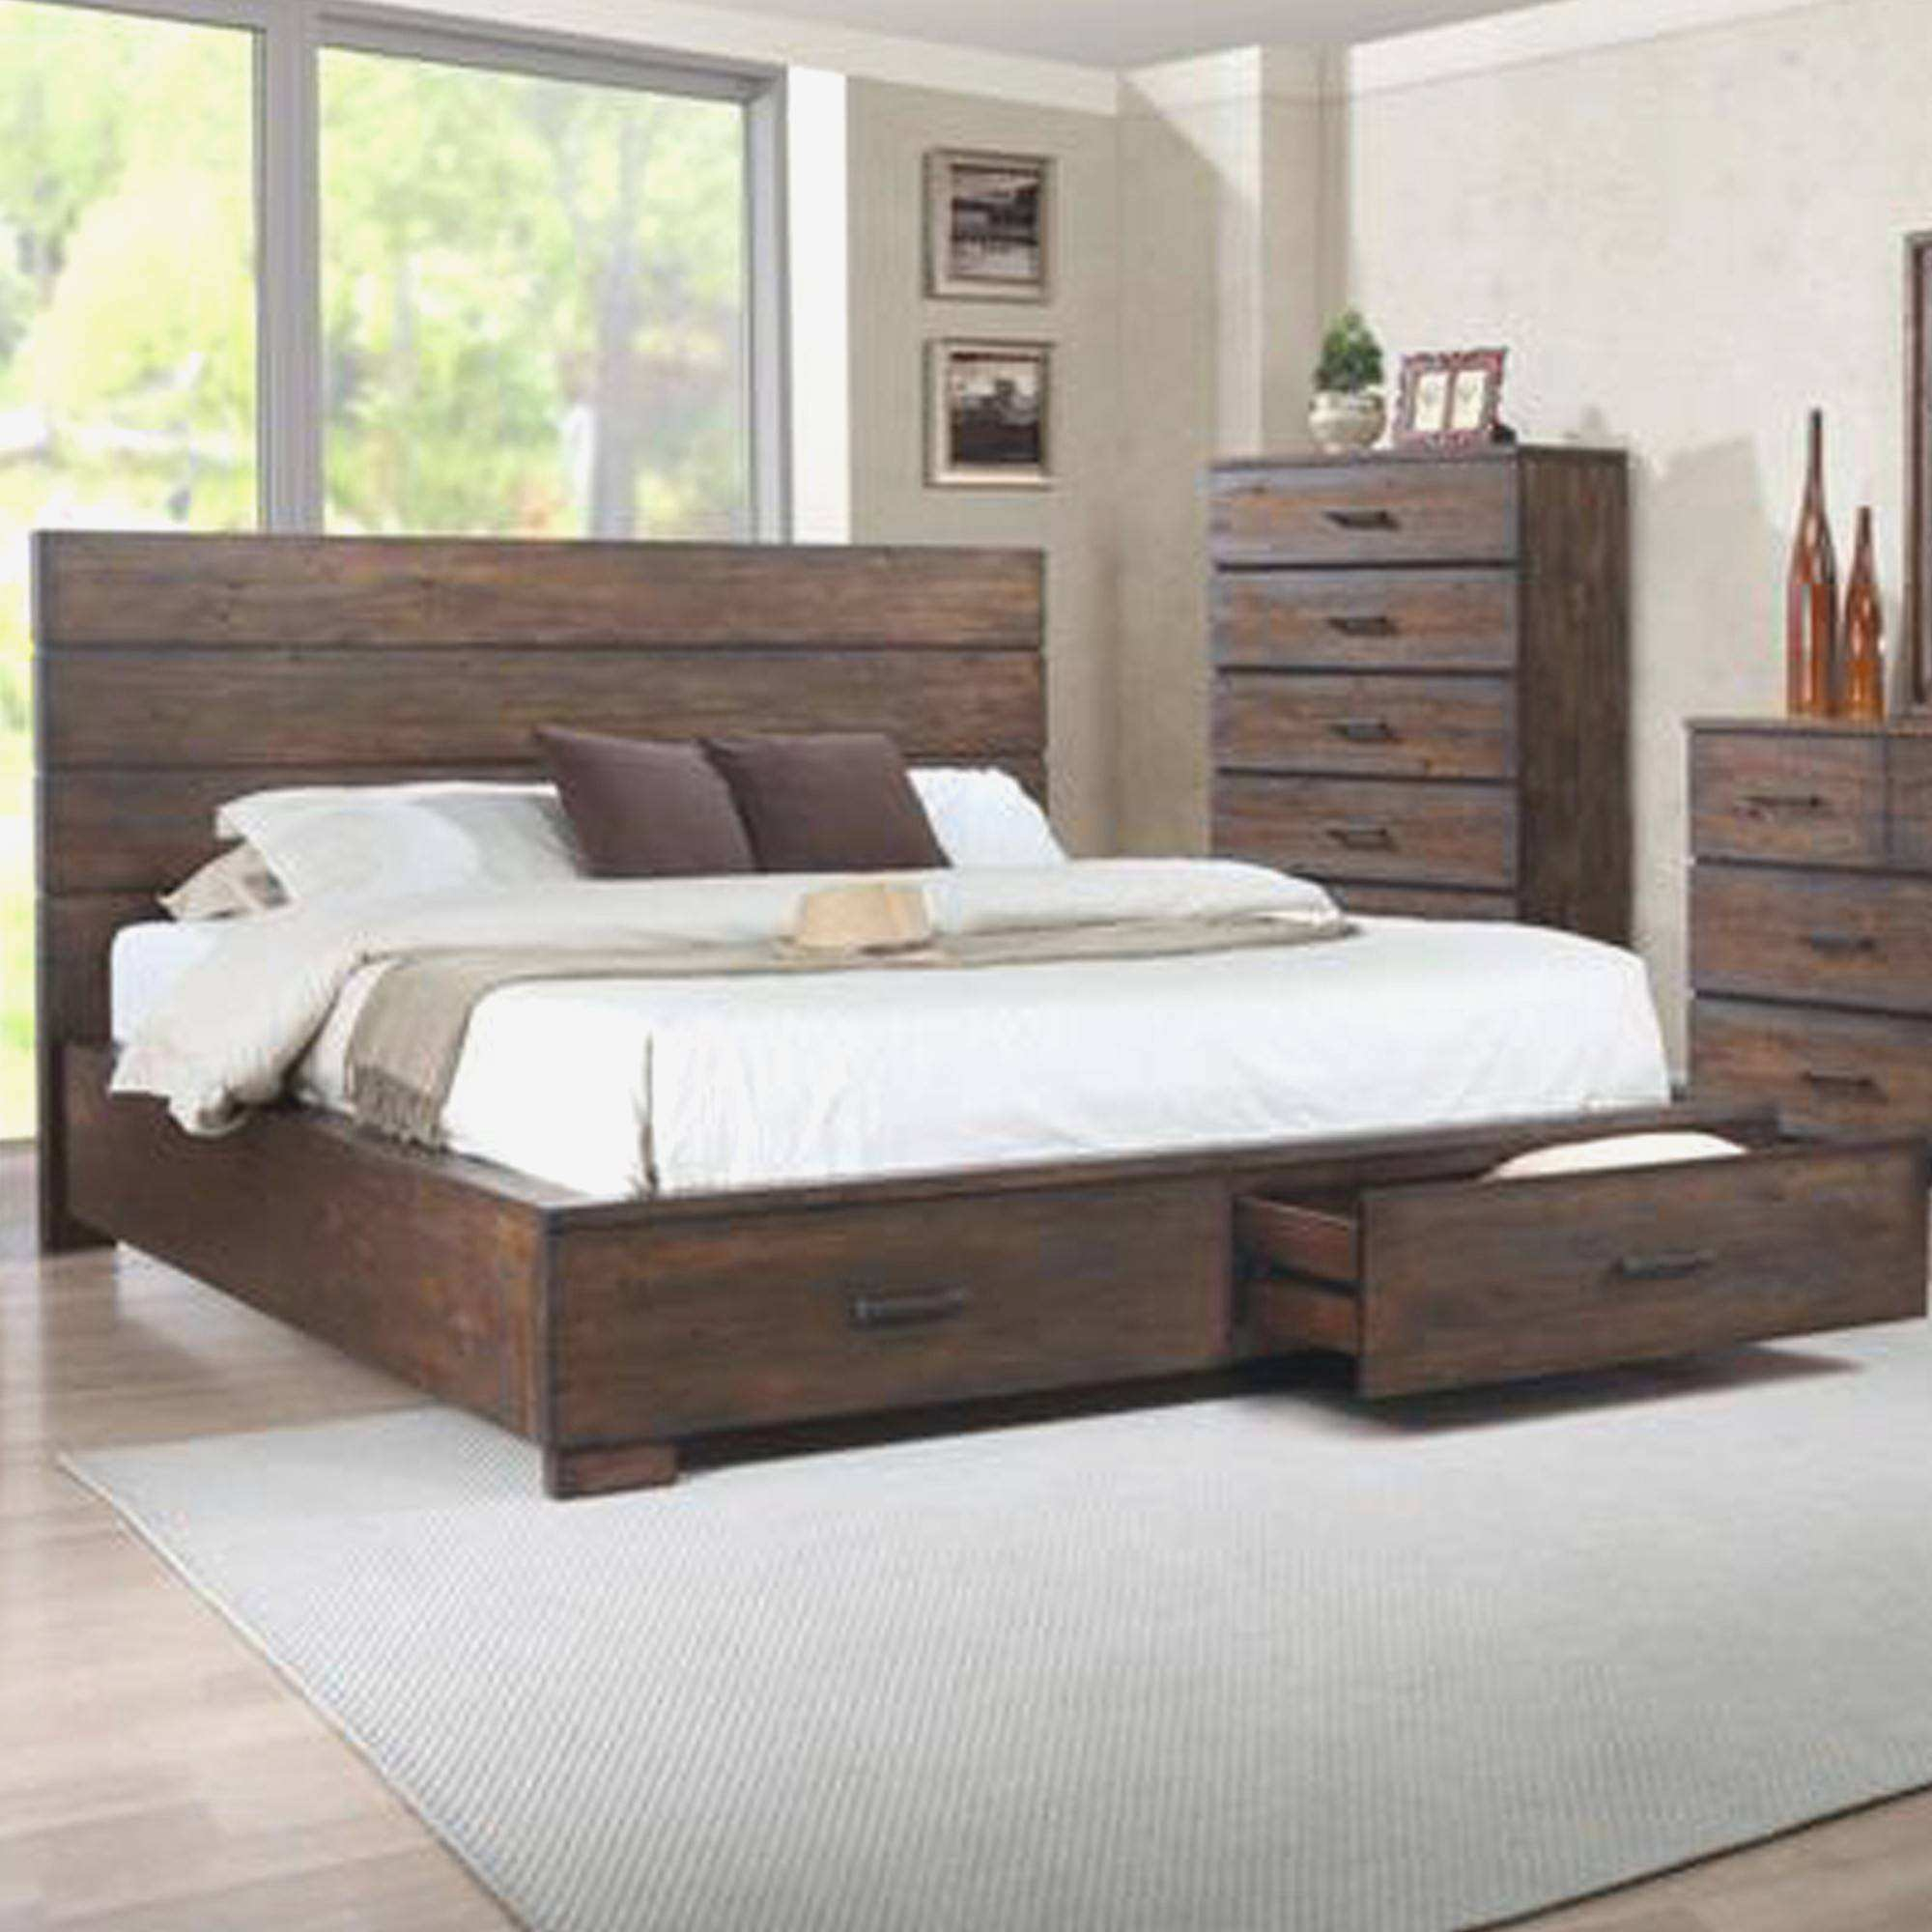 Bernie And Phyls Bedroom Sets Att Rewards Contact Number intended for size 2000 X 2000